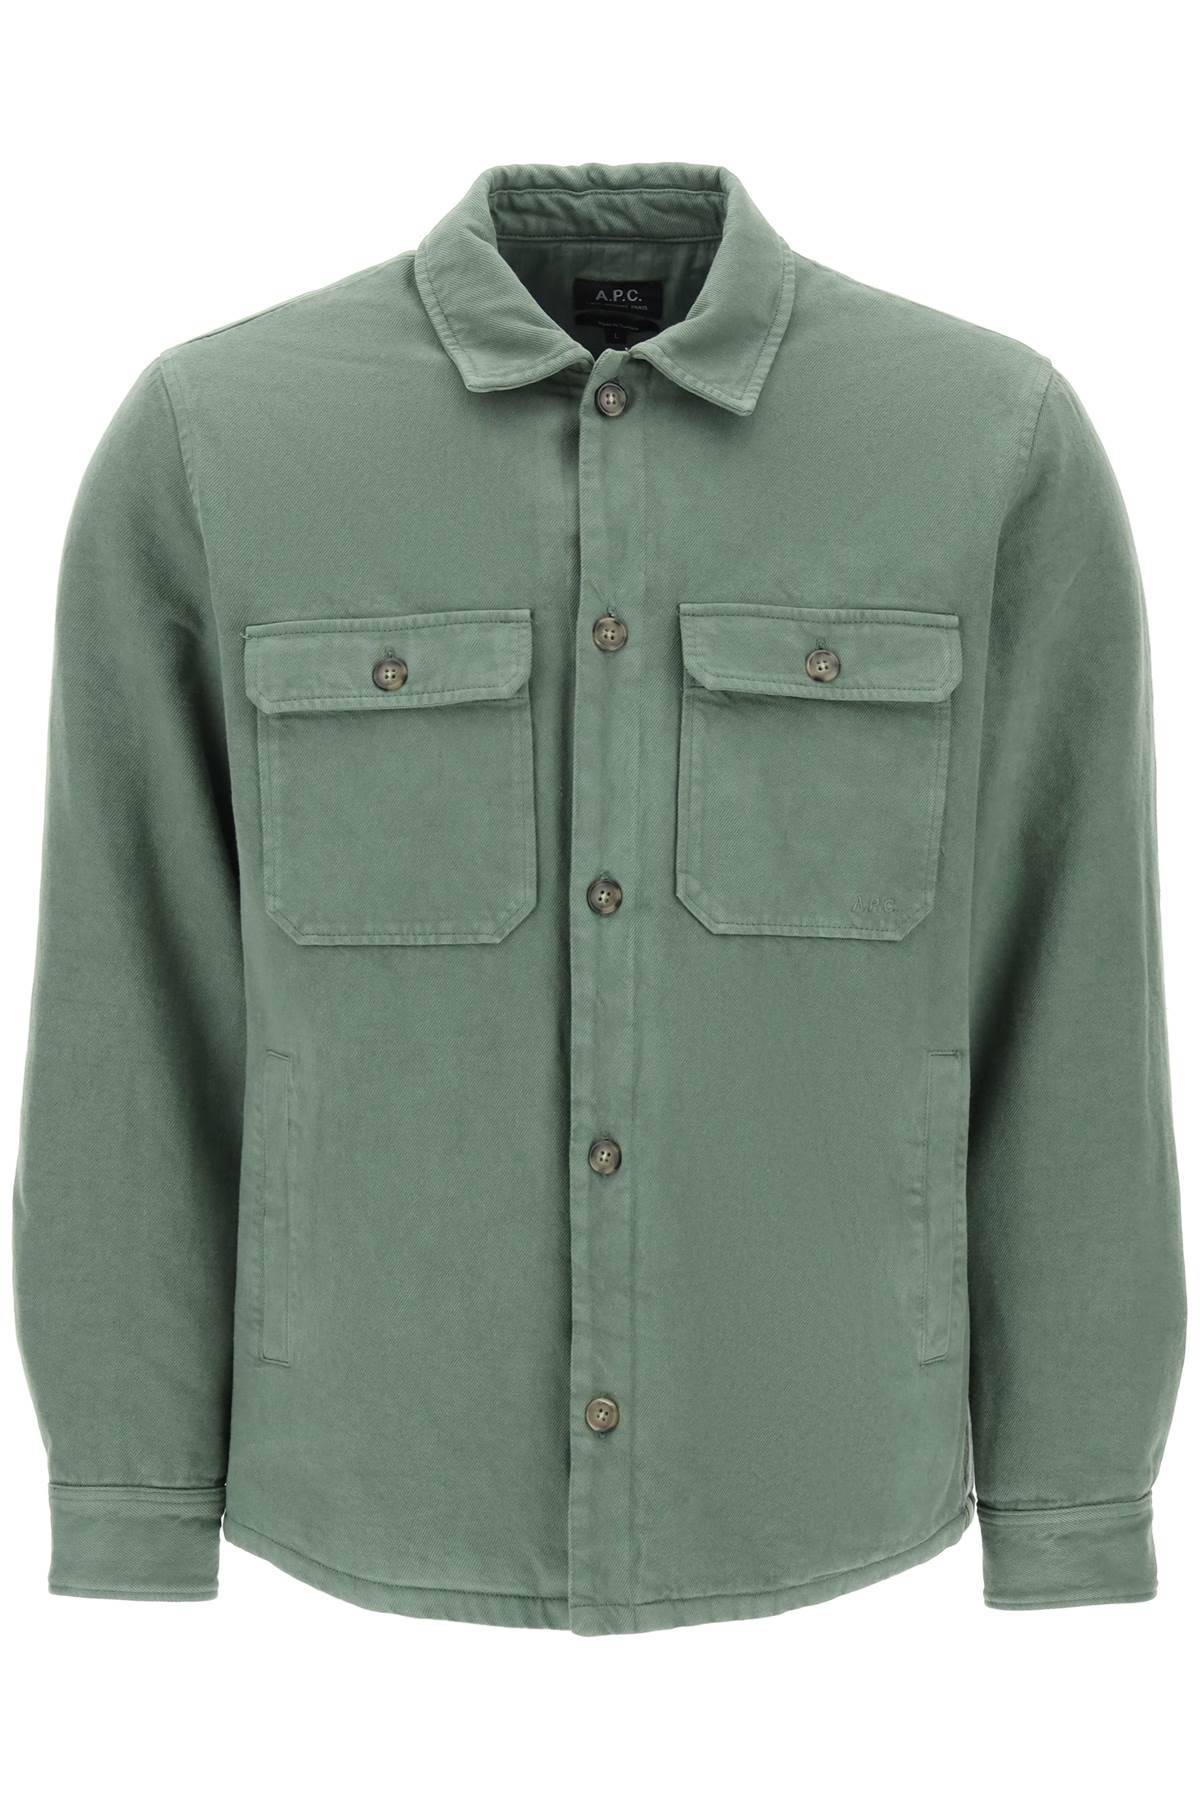 A.P.C. A. P.C. alessio padded overshirt